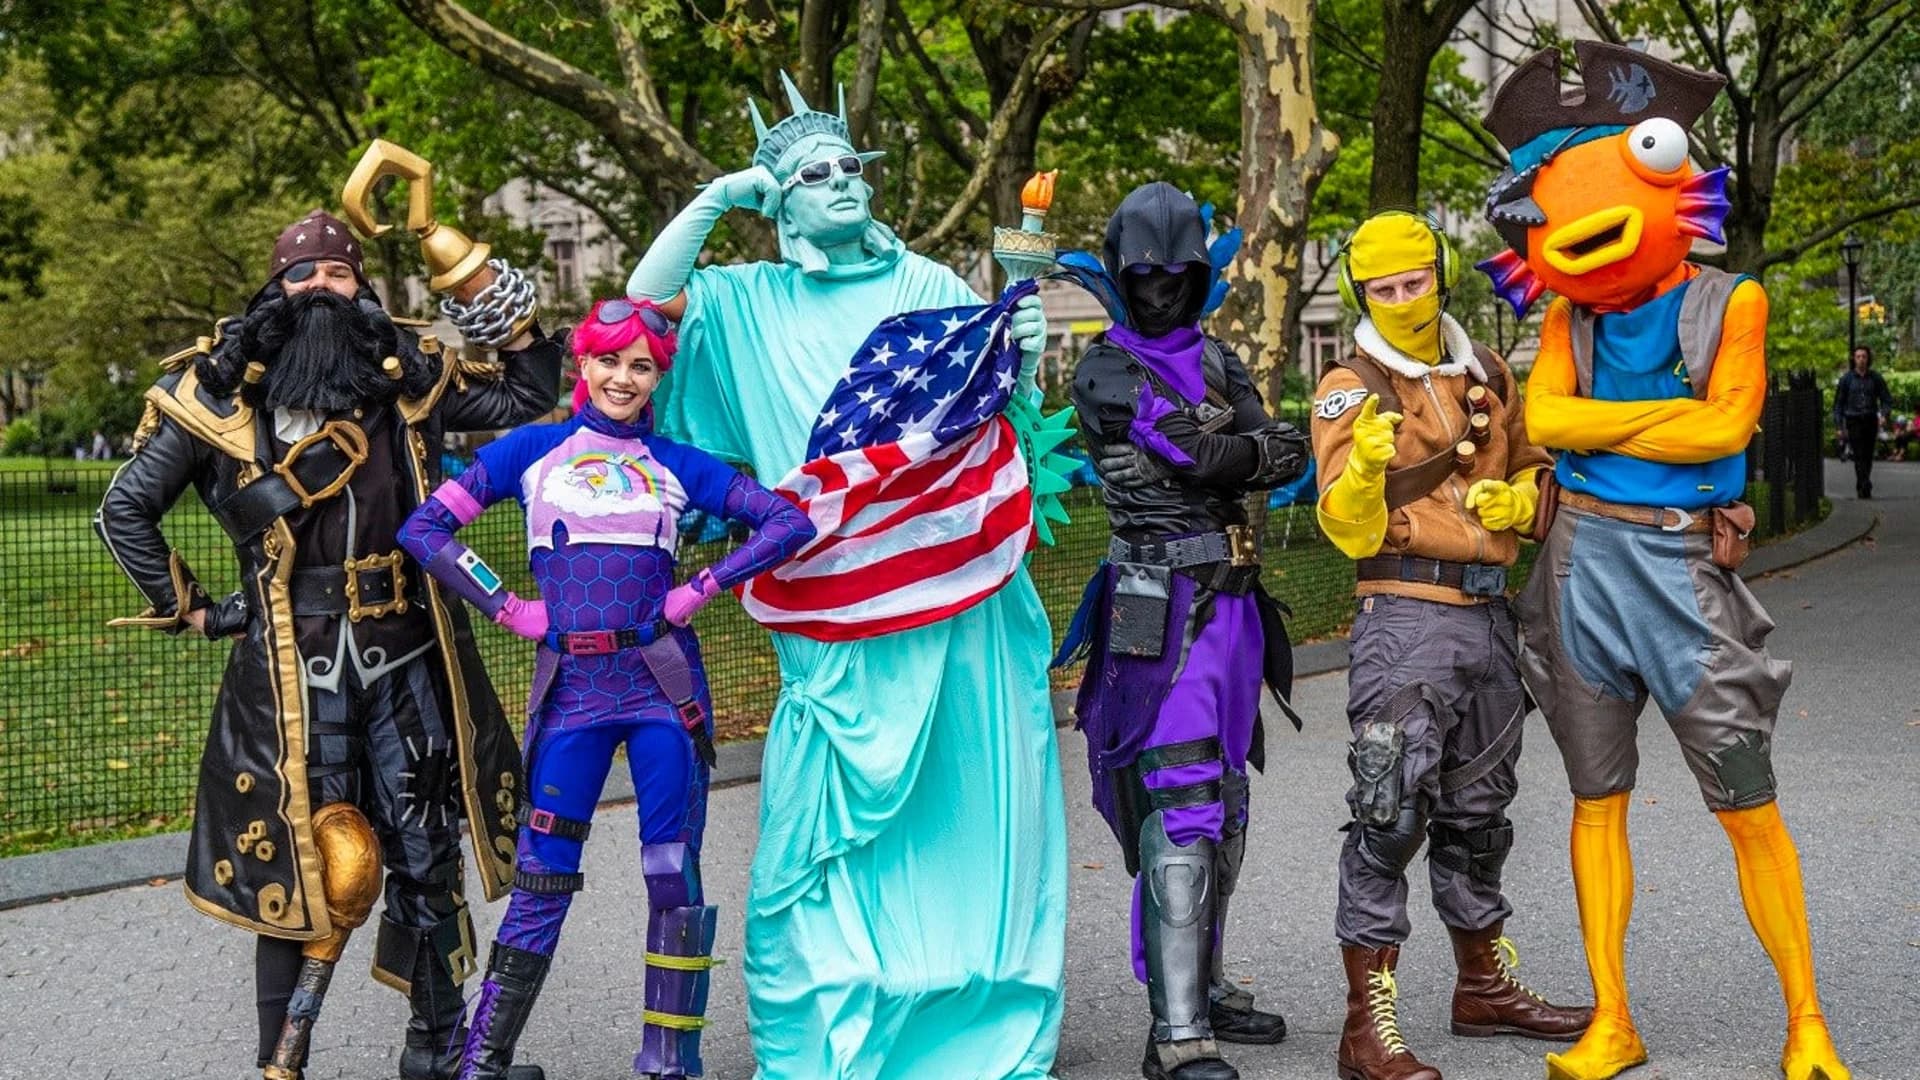 PHOTOS: Fortnite World Cup takes over New York